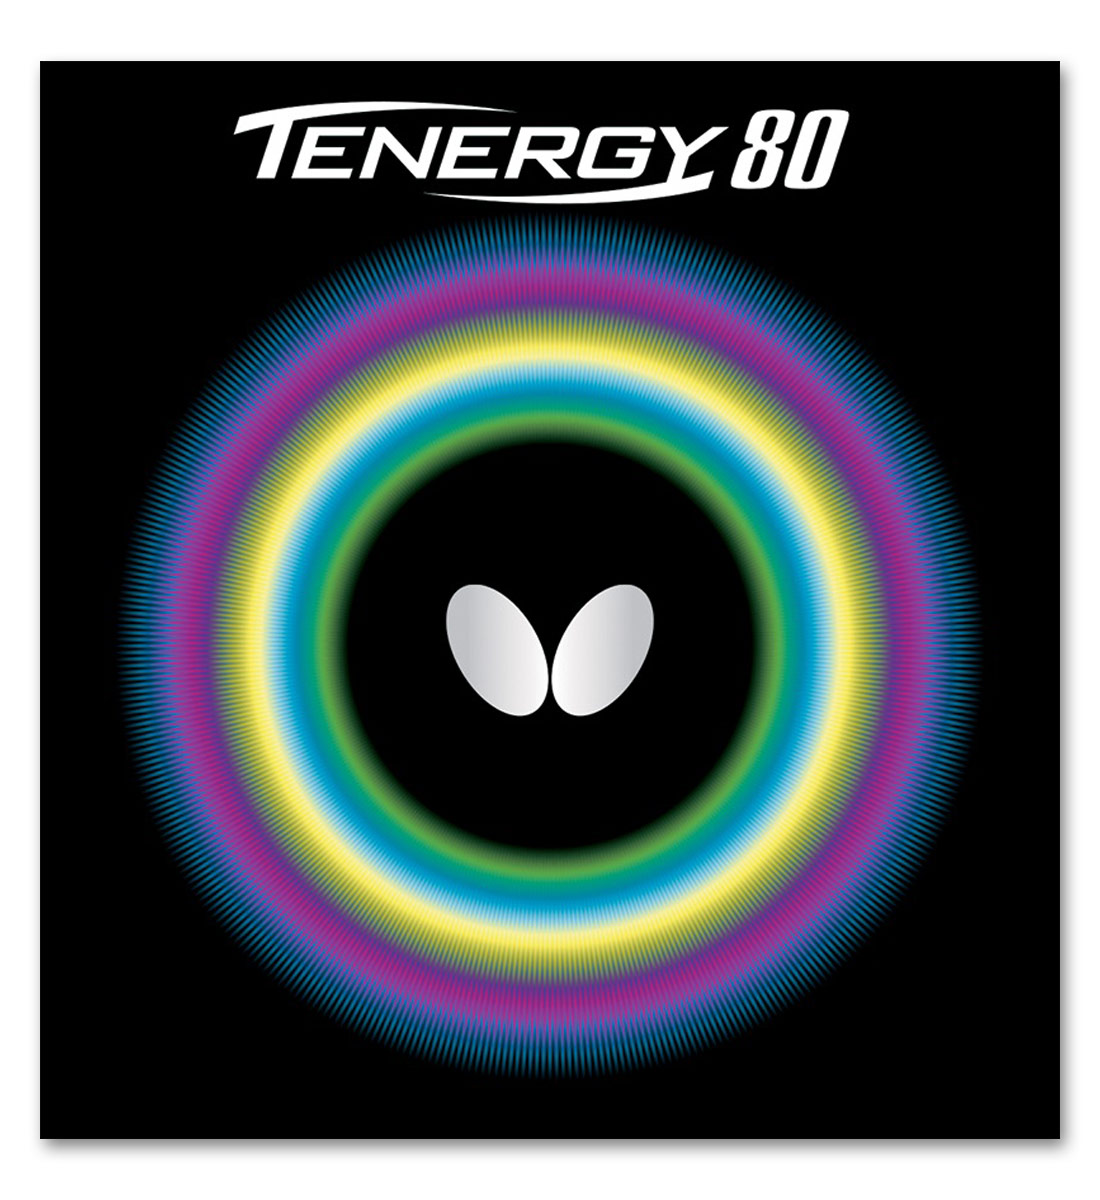 Butterfly Tenergy 80 Questions & Answers